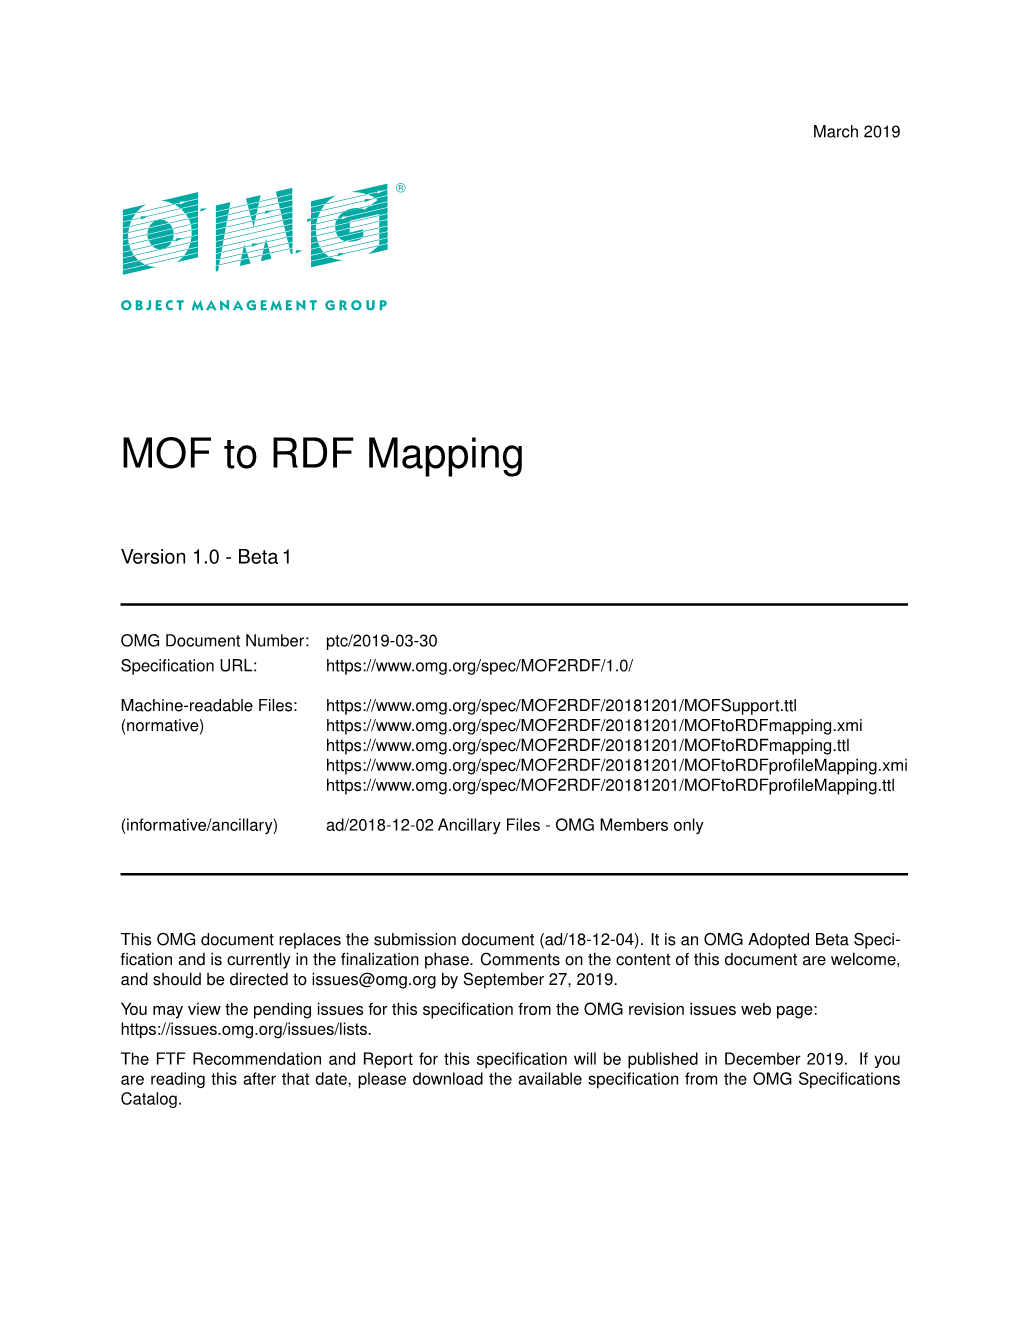 MOF to RDF Mapping Specification